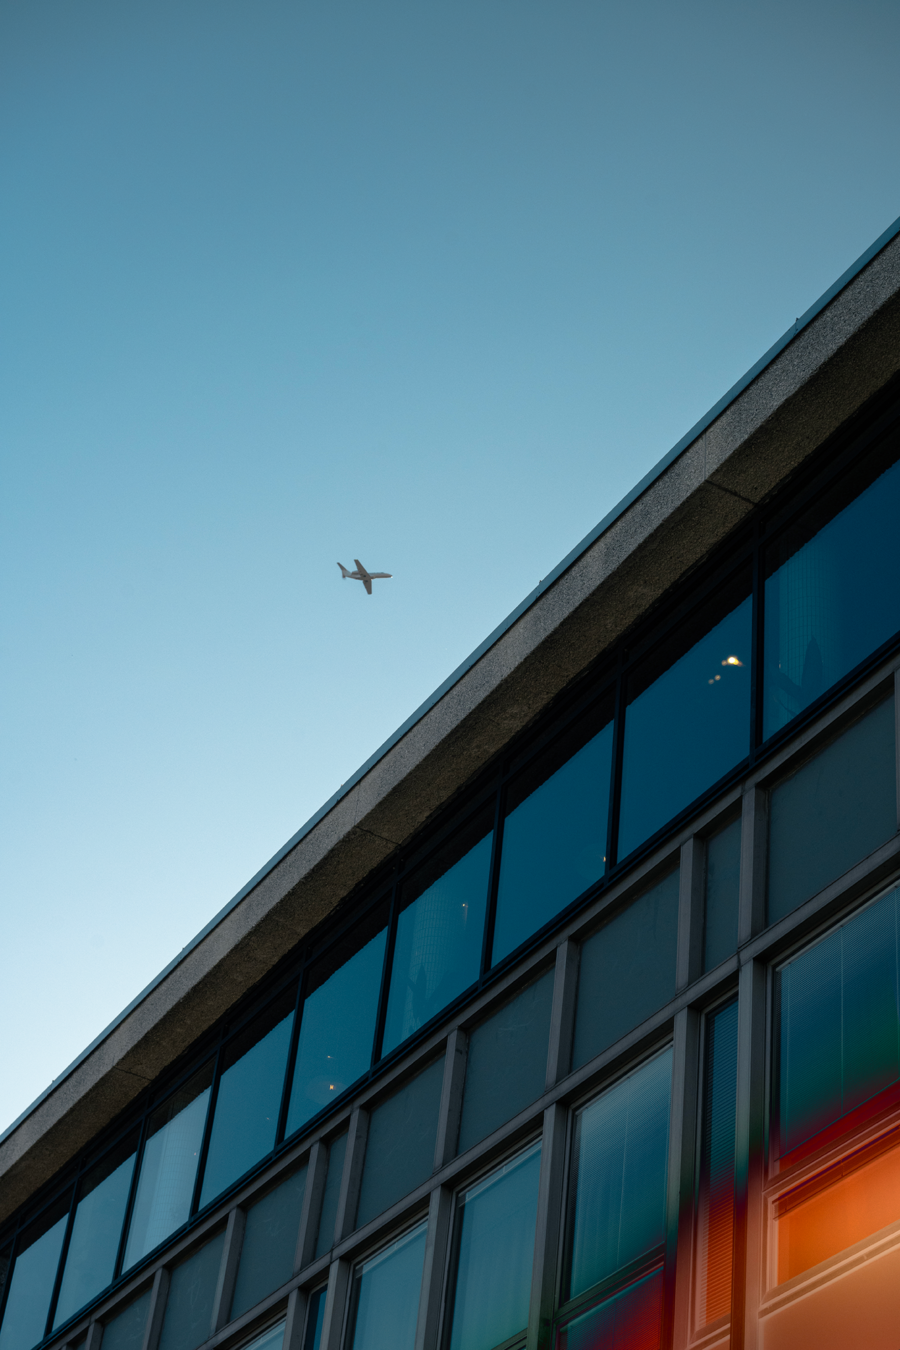 A modern building and an airplane flying in the clear blue sky above it.